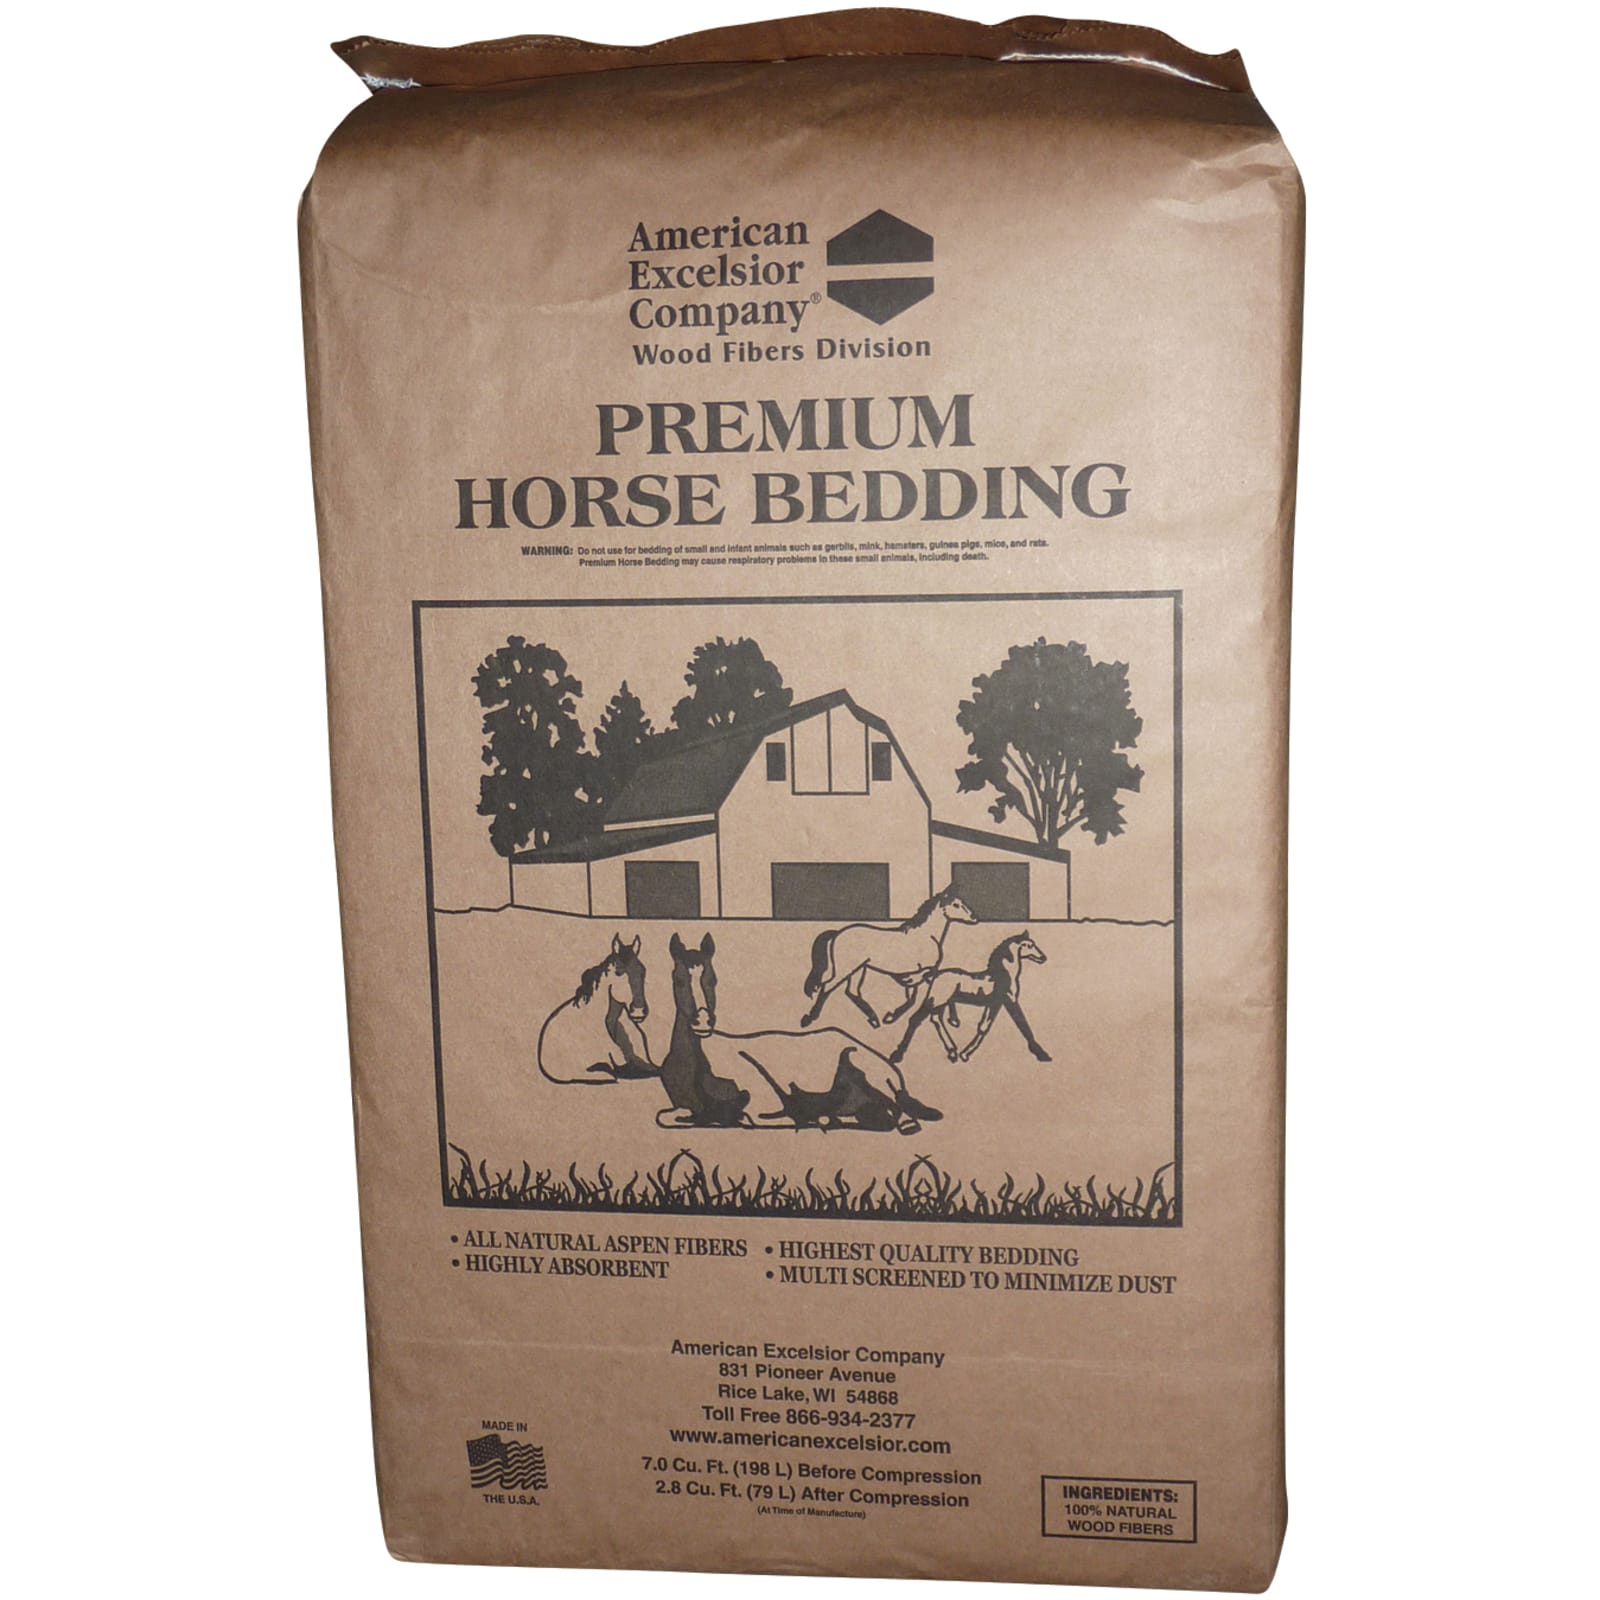 7 cu ft Premium Horse Bedding by American Excelsior Company at Fleet Farm